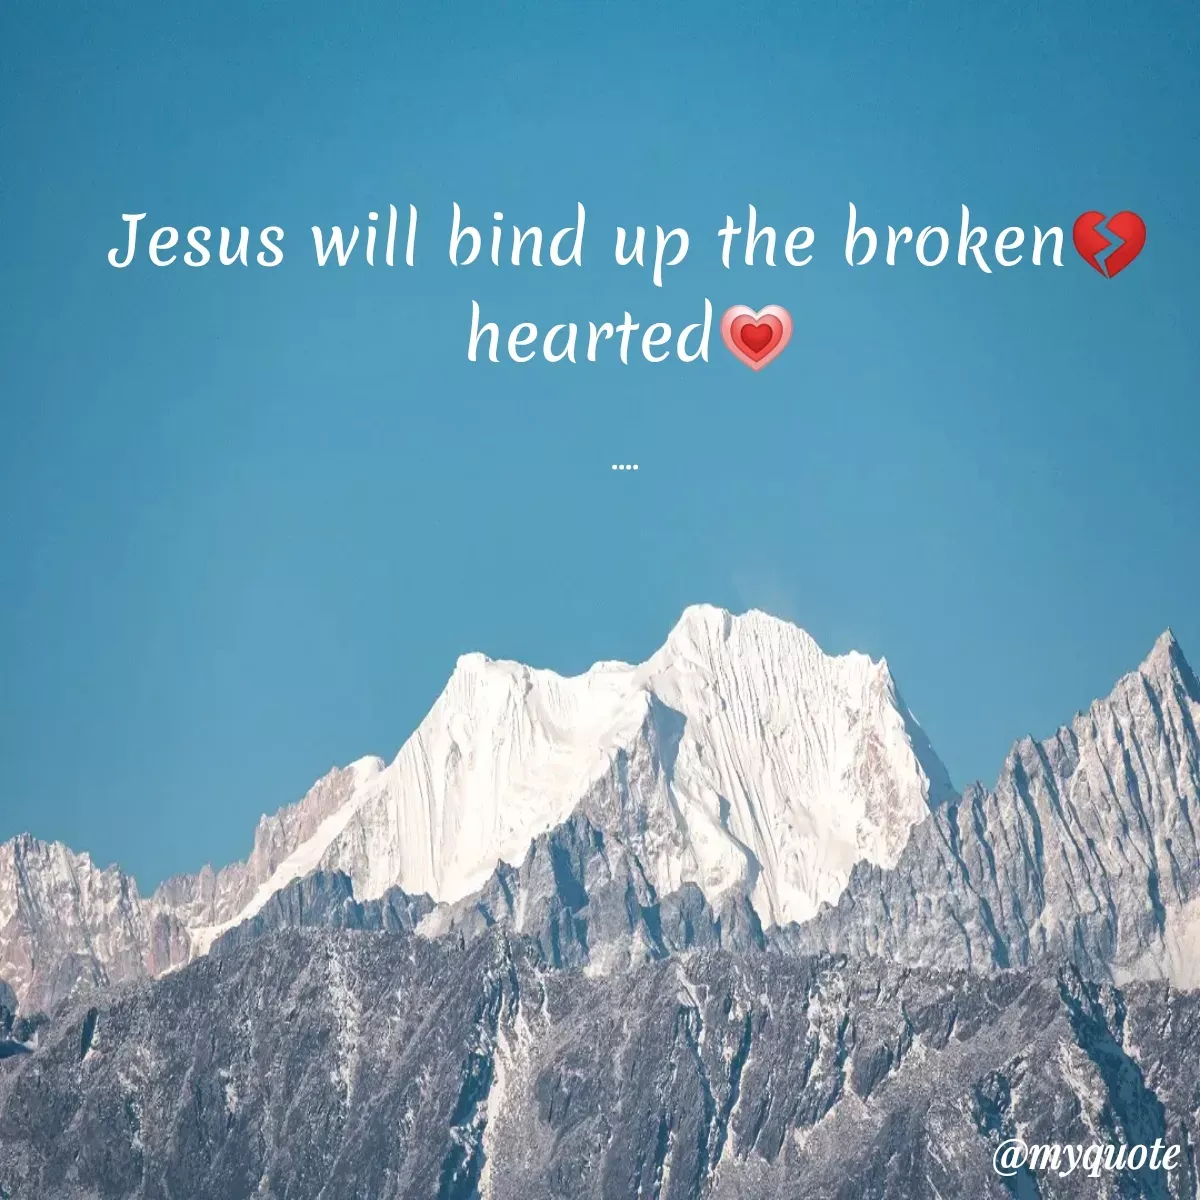 Quote by Maben Sisters - Jesus will bind up the broken
heartedO
@myquote
 - Made using Quotes Creator App, Post Maker App